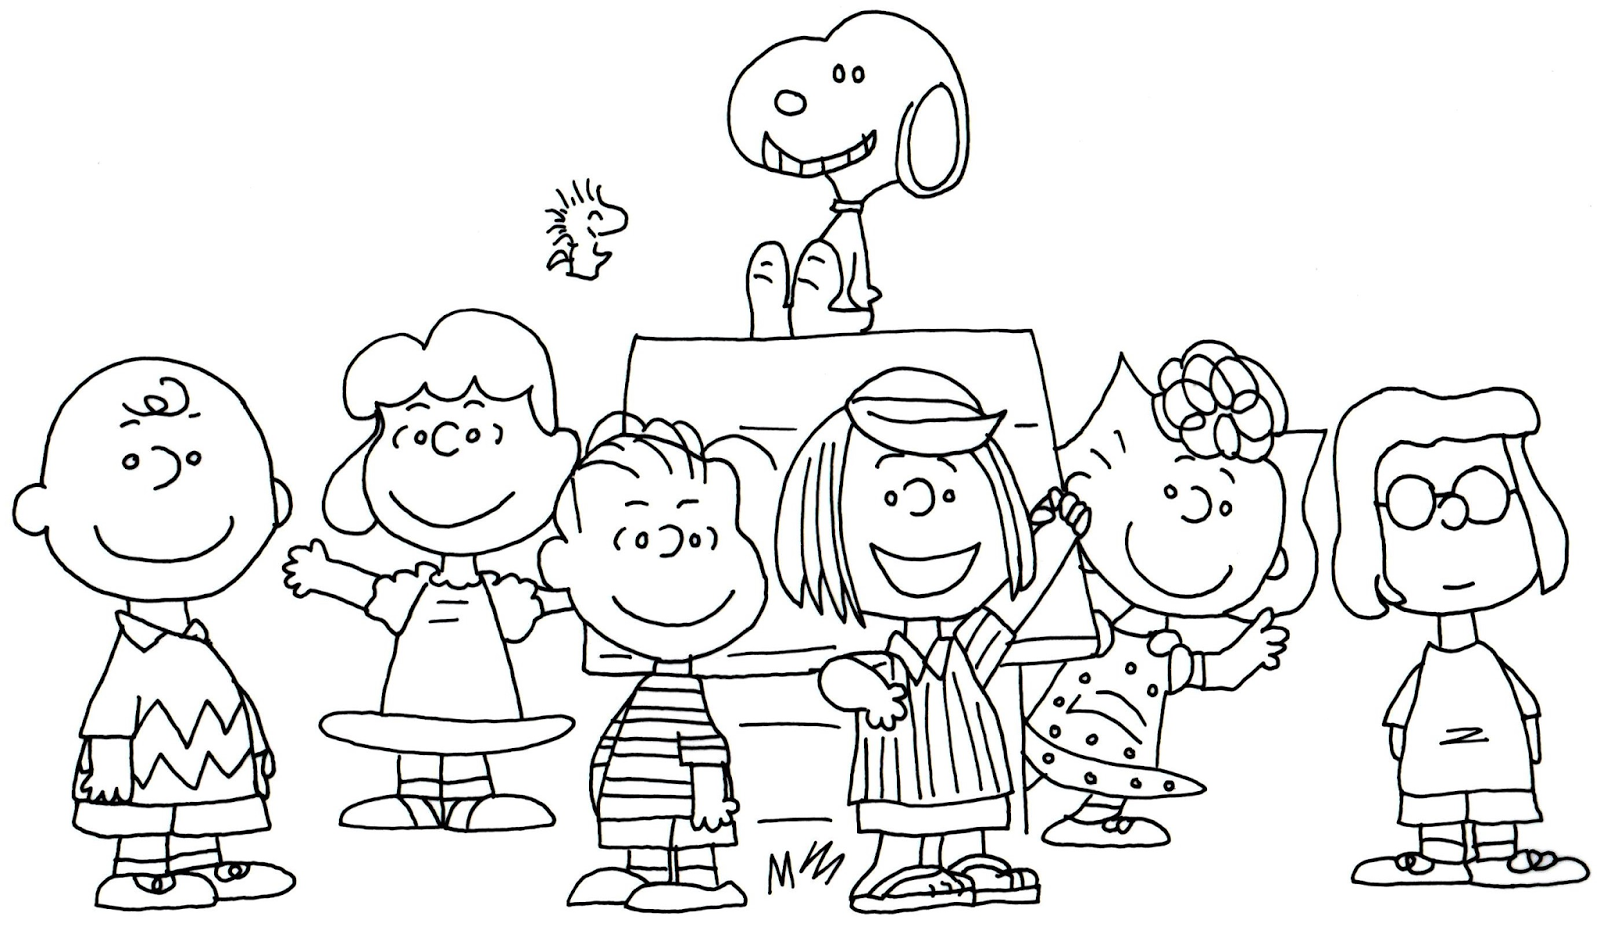 free-woodstock-snoopy-coloring-pages-download-free-woodstock-snoopy